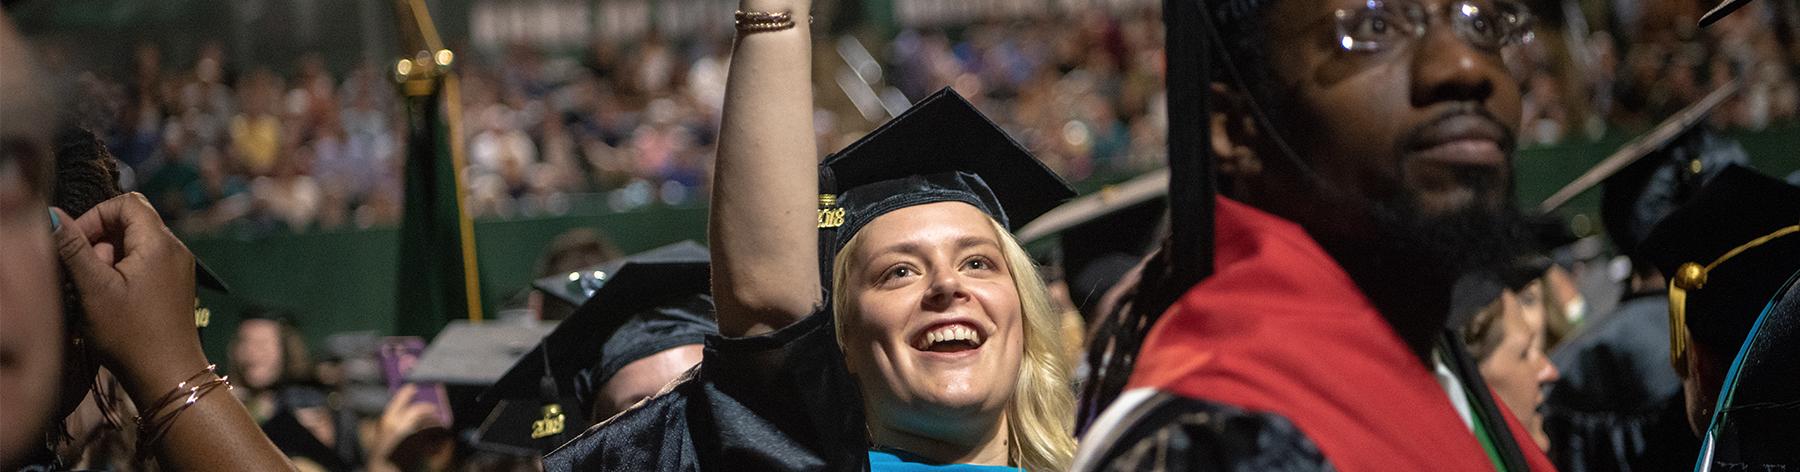 Graduate student waves at commencement